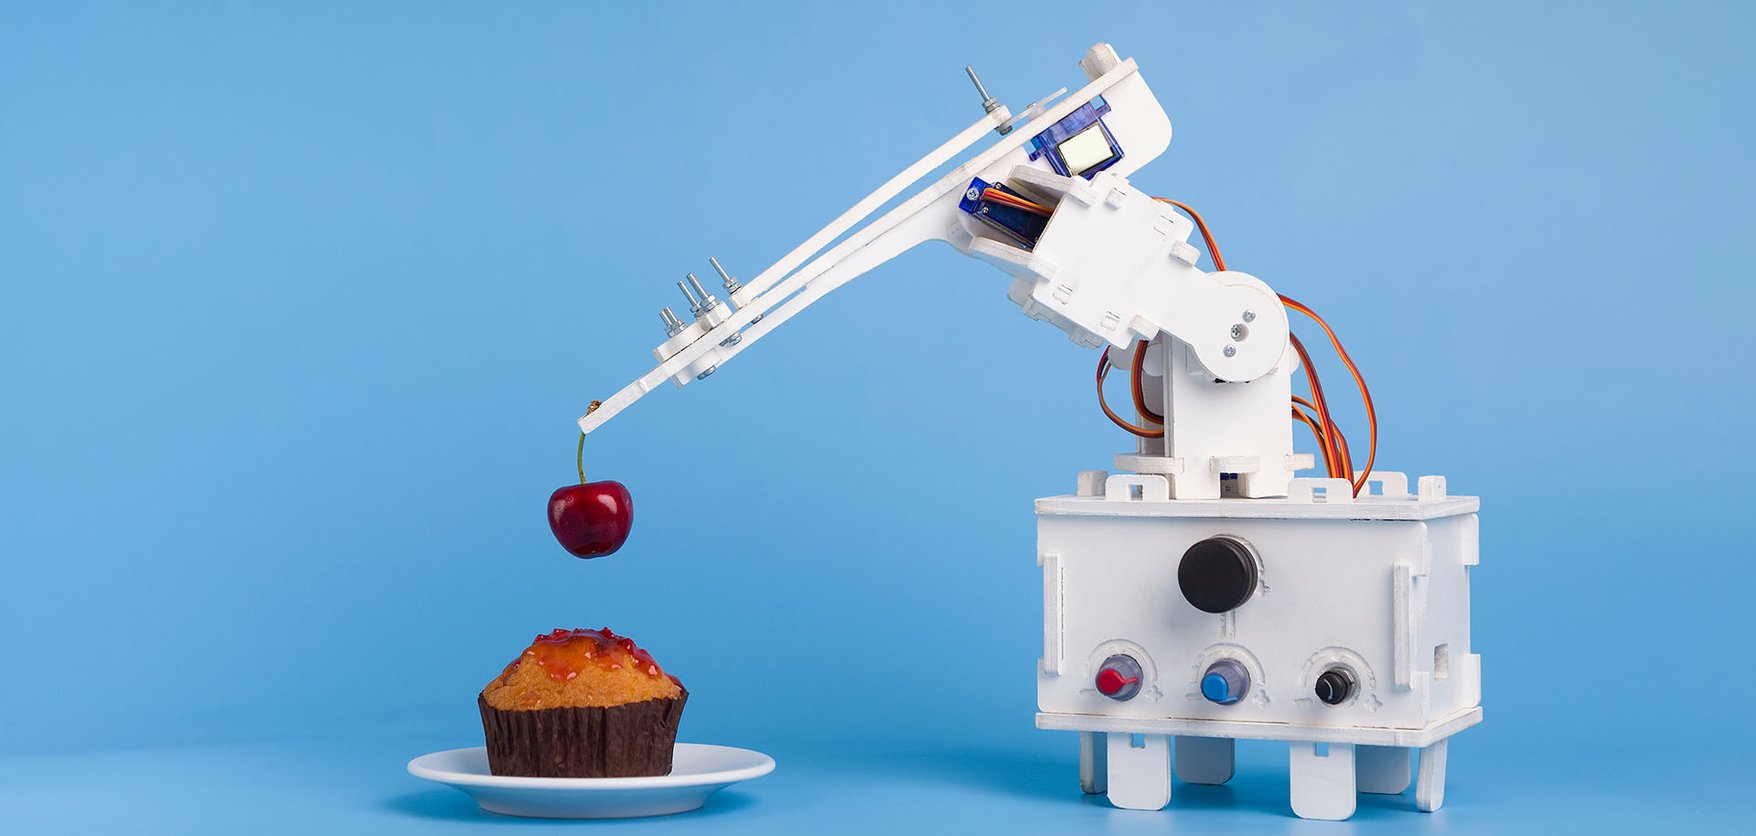 A robotic arm placing a cherry on top of a cake